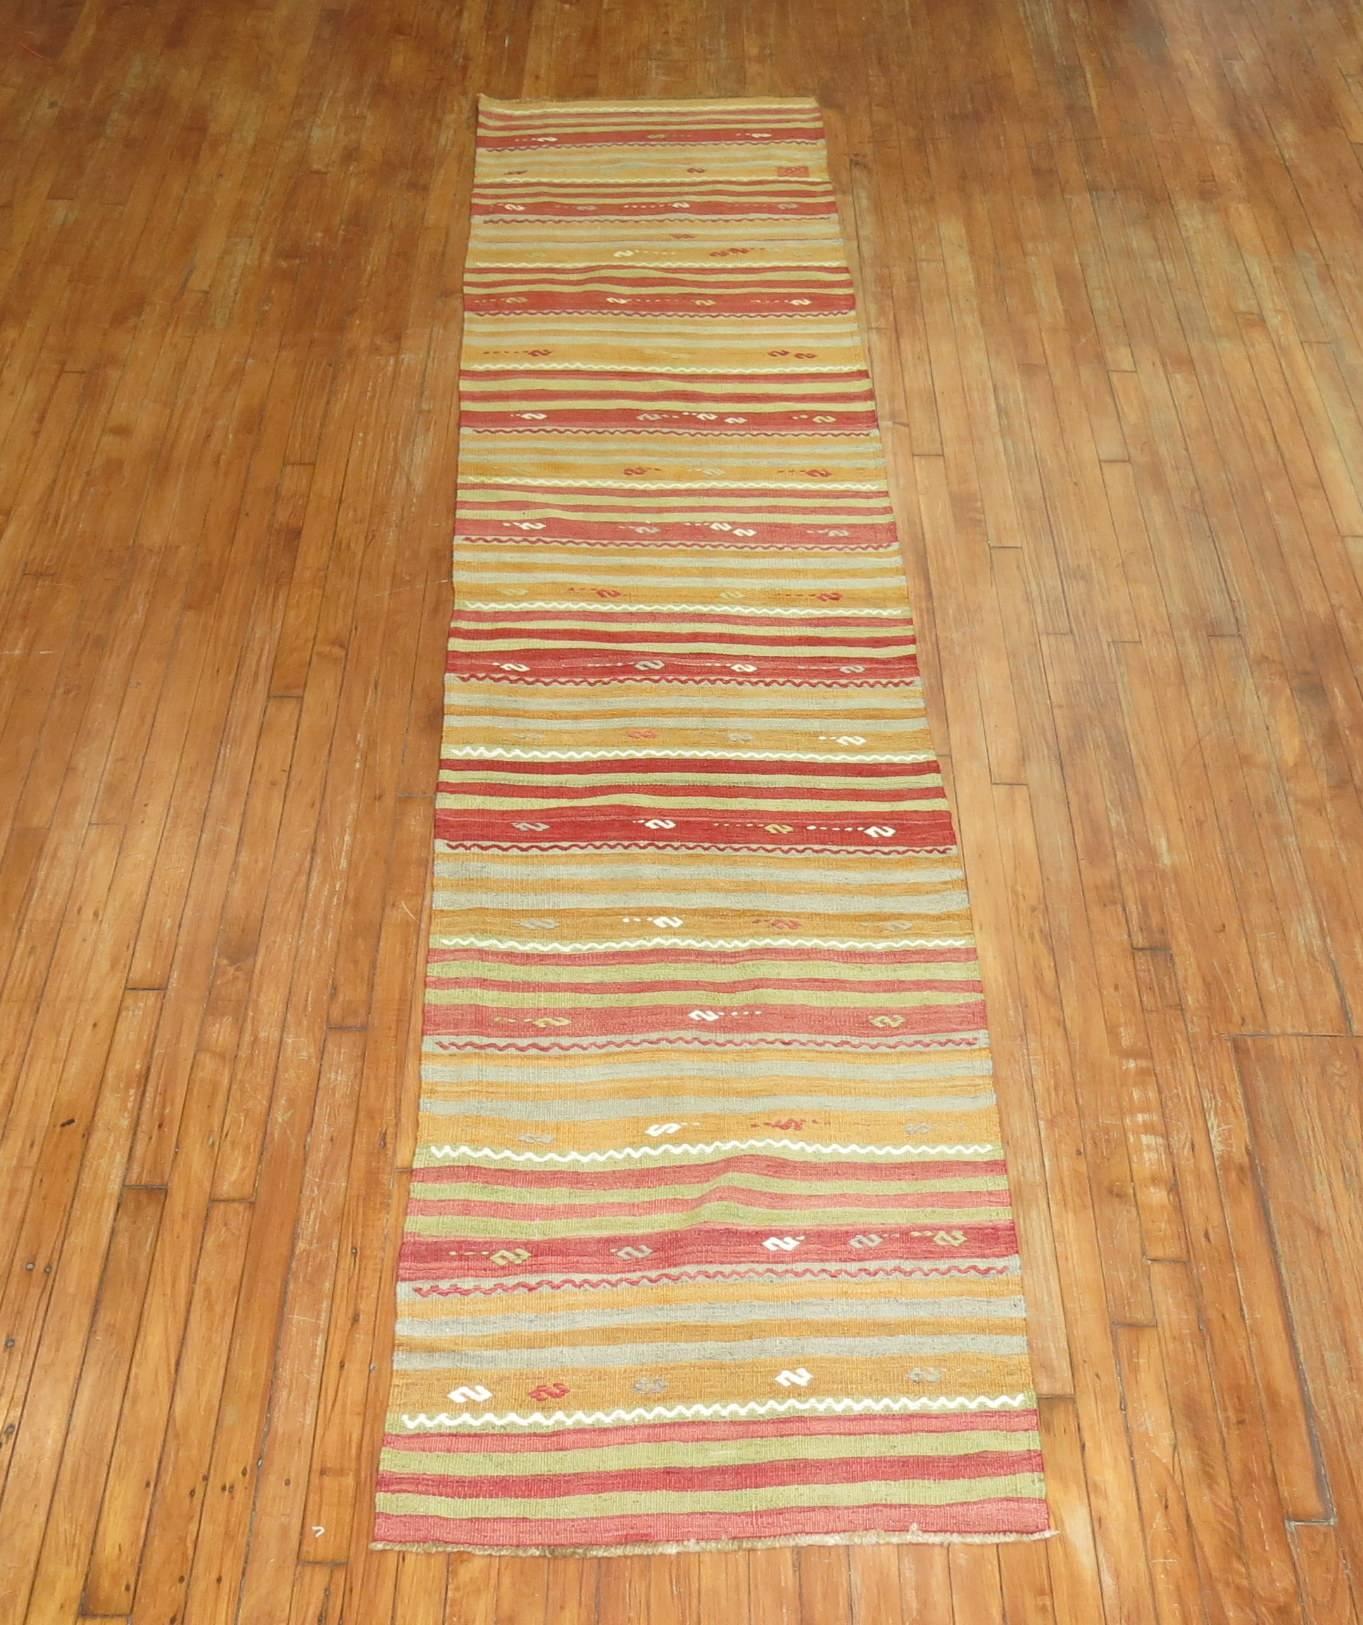 A mid century Turkish Kilim runner from the mid-20th century.

Measures: 2'8